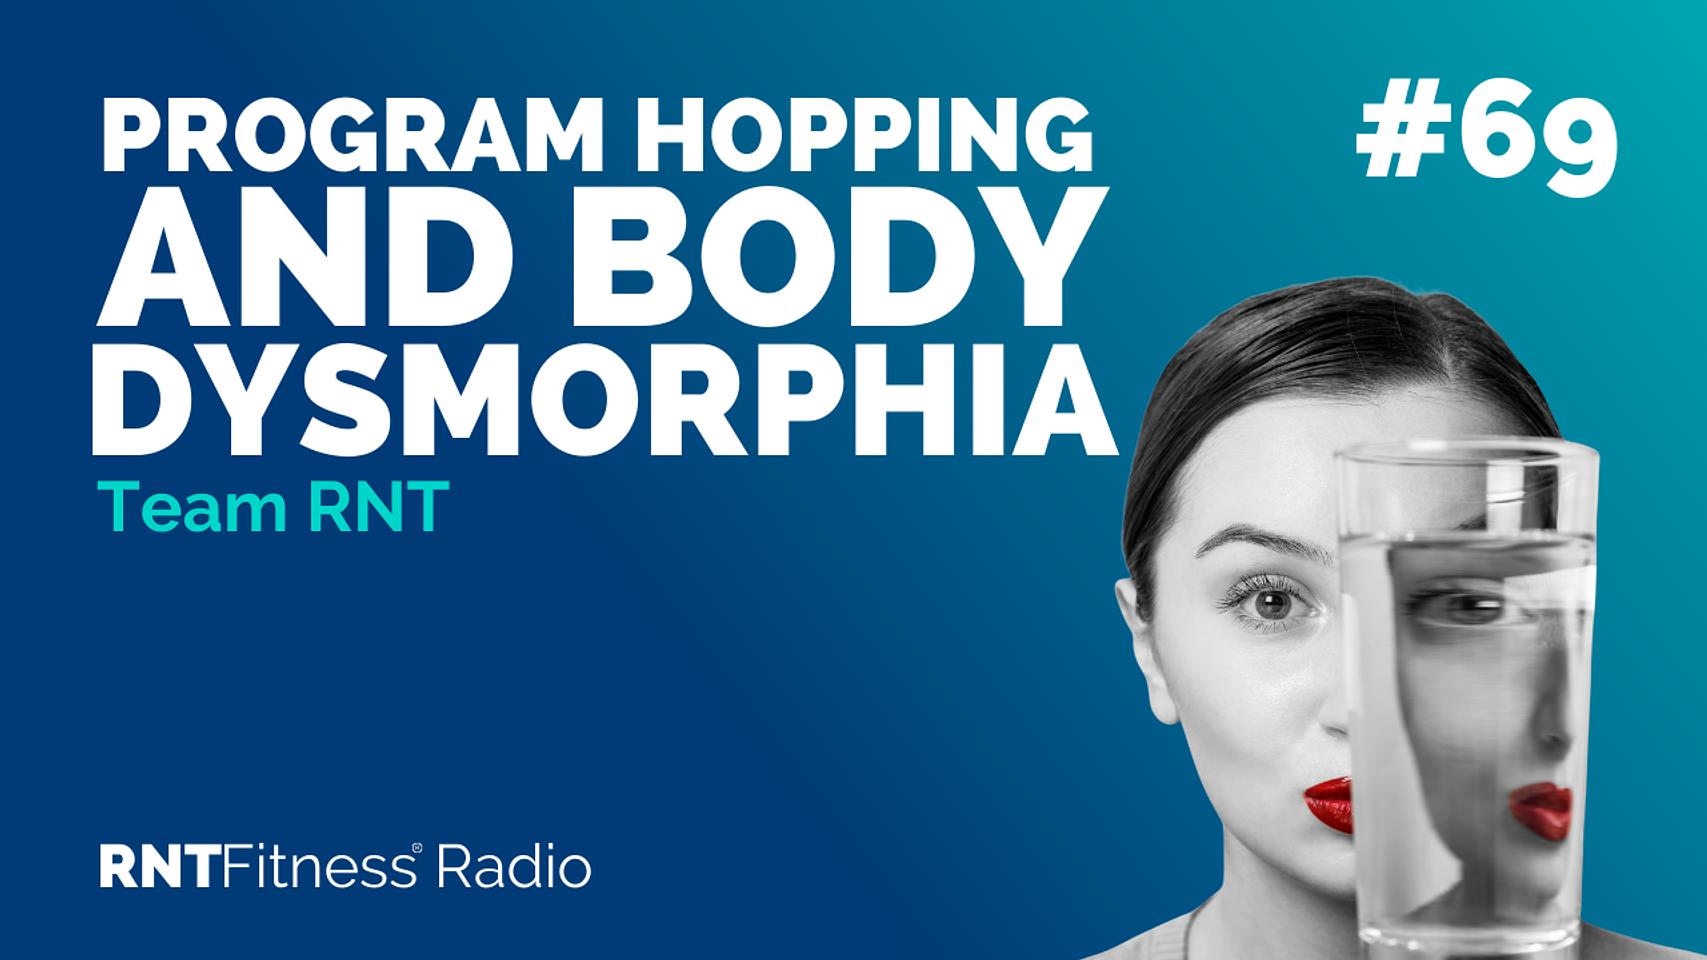 Ep. 69 - Stages Of Change On A Transformation Journey, Programme Hopping & Body Dysmorphia